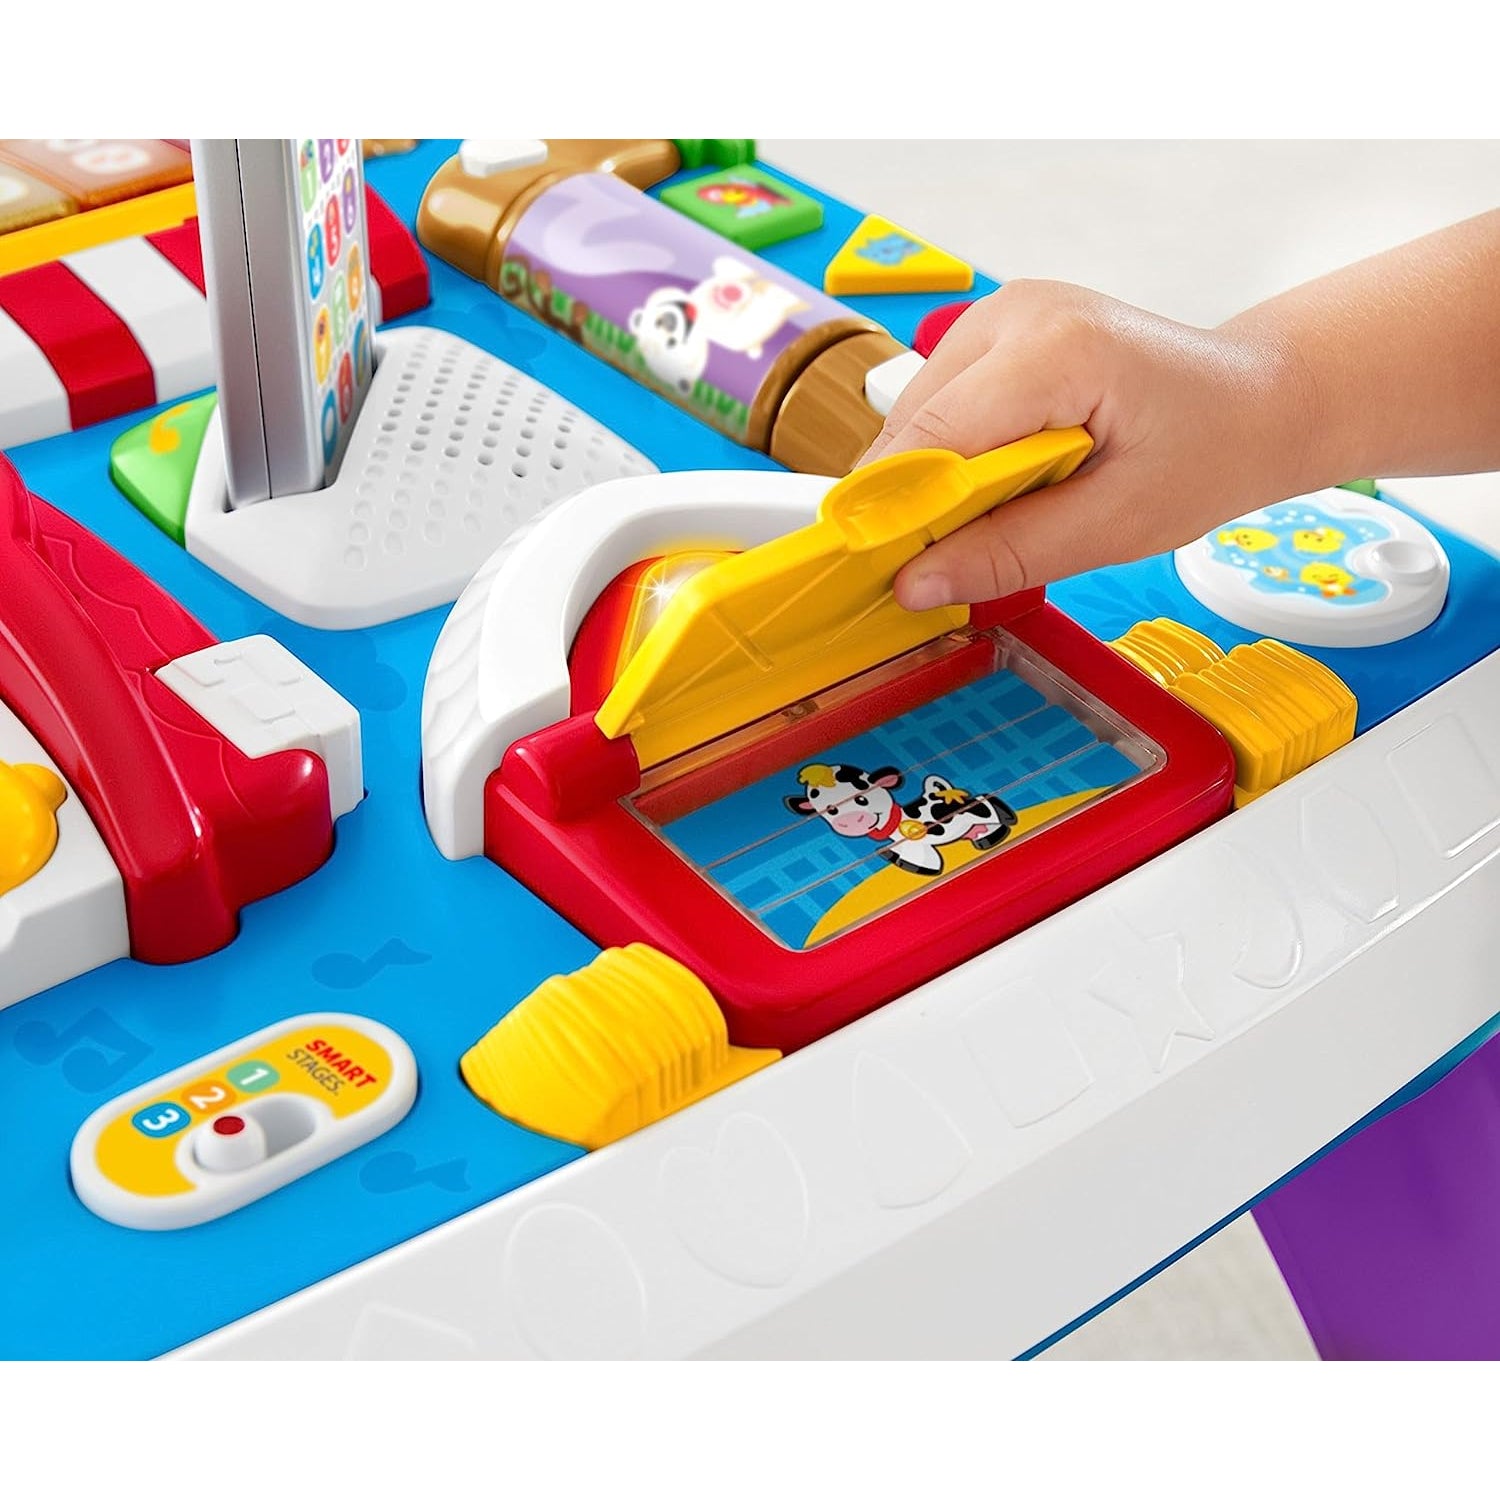 Fisher-Price Laugh & Learn Around the Town Learning Table